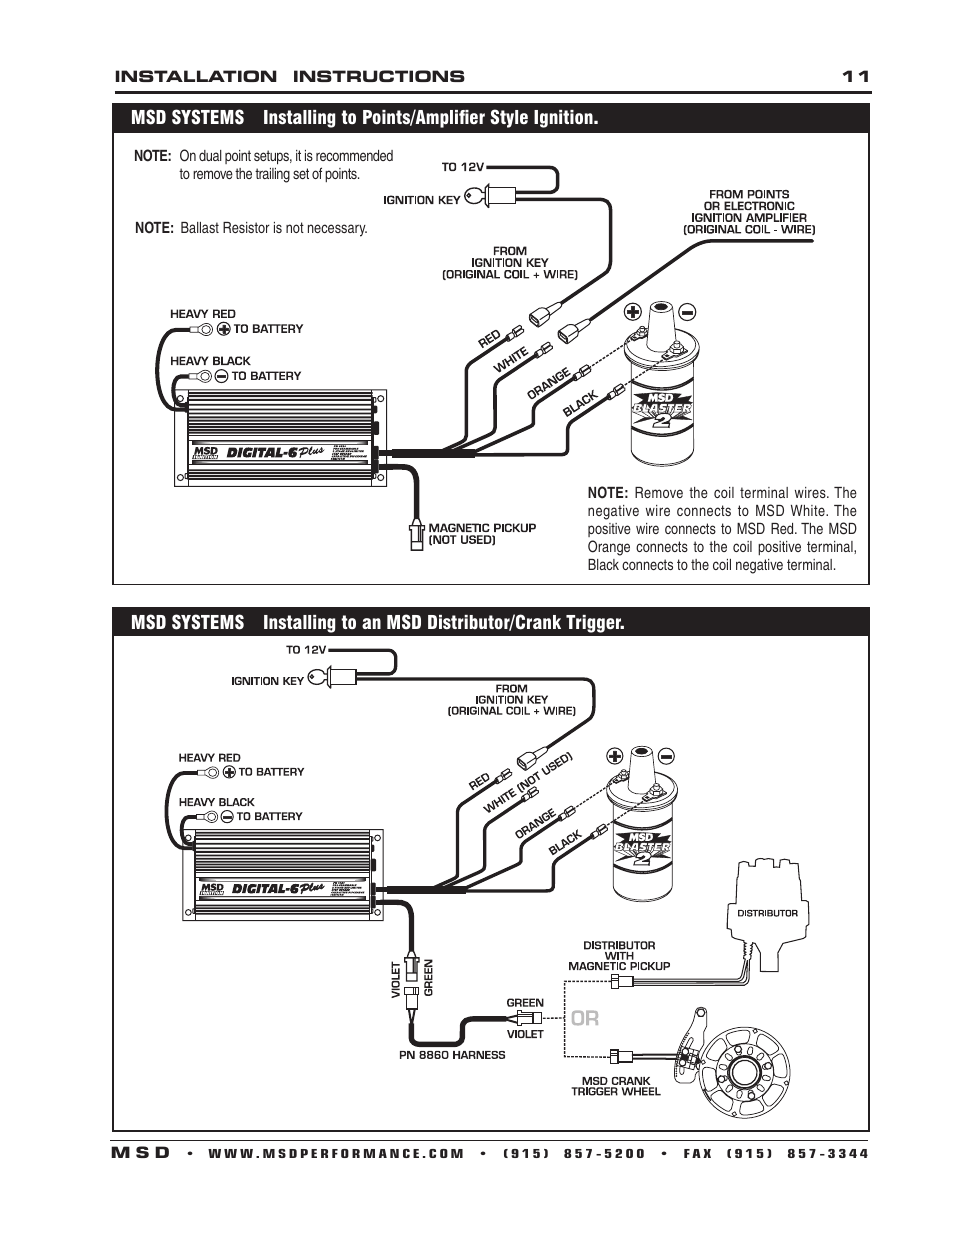 MSD 6520 Digital 6-Plus Ignition Control Installation User Manual | Page 11 / 24